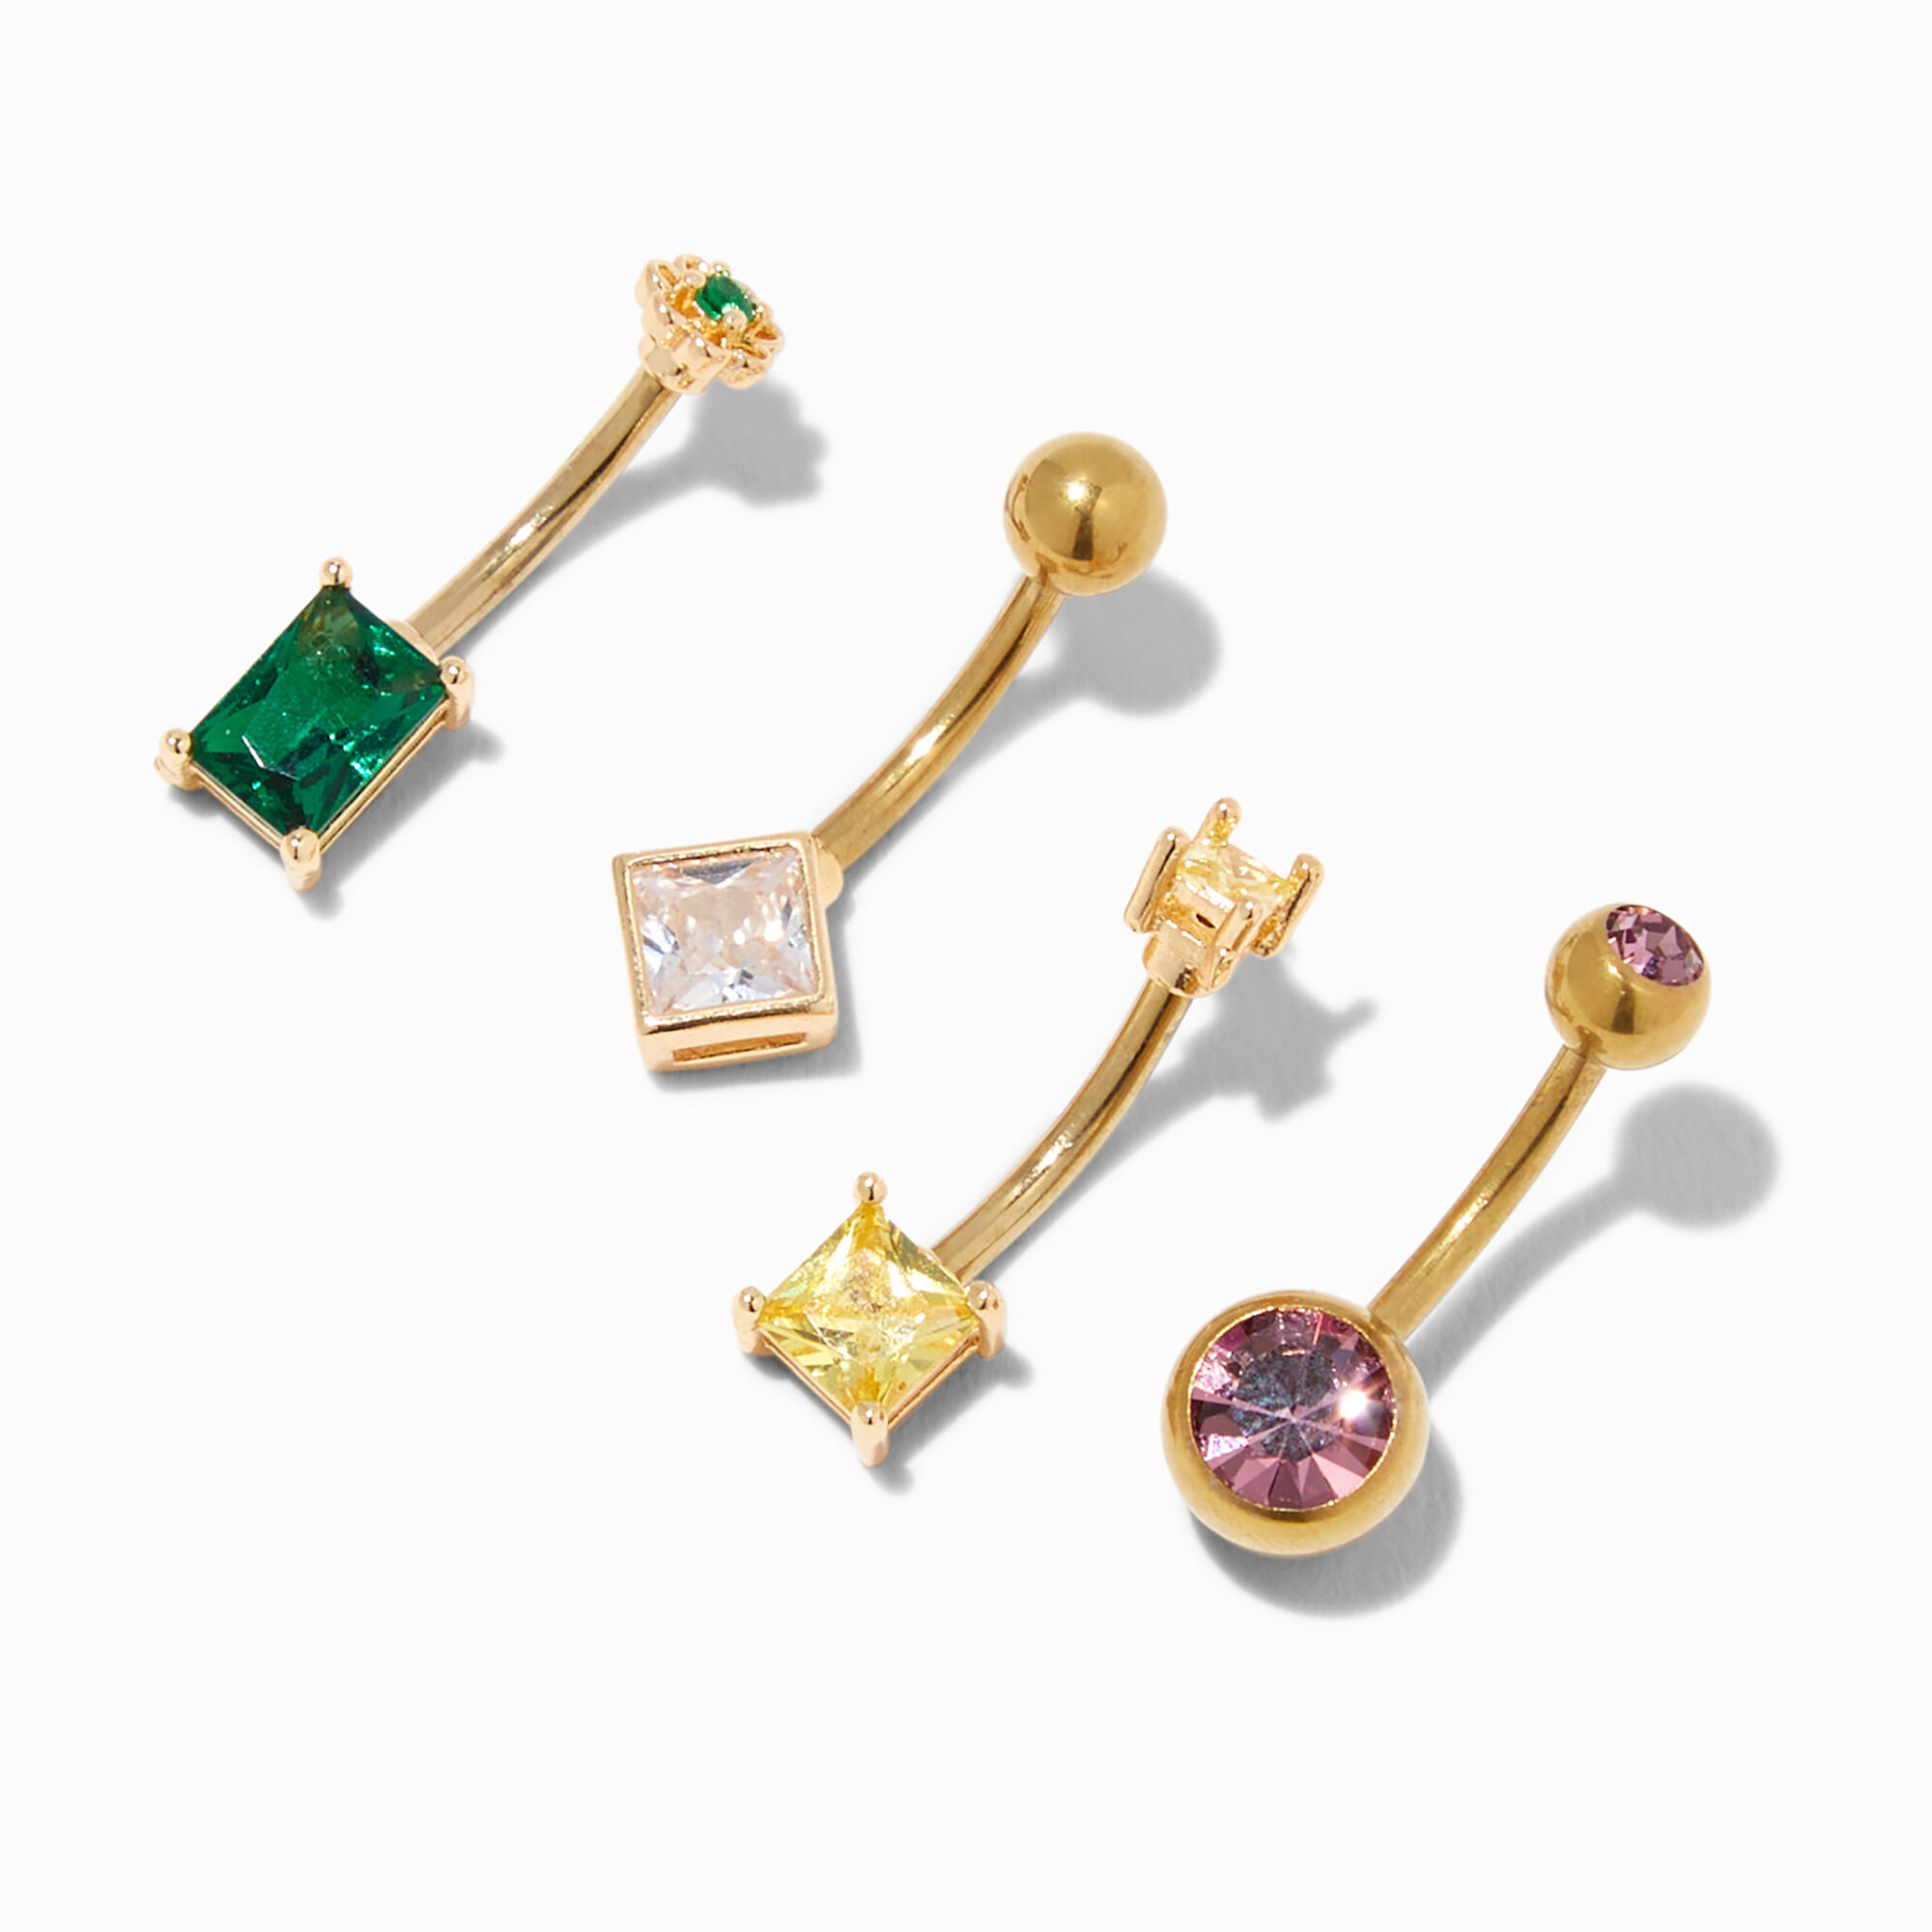 View Claires Tone Gem Belly Rings 4 Pack Gold information